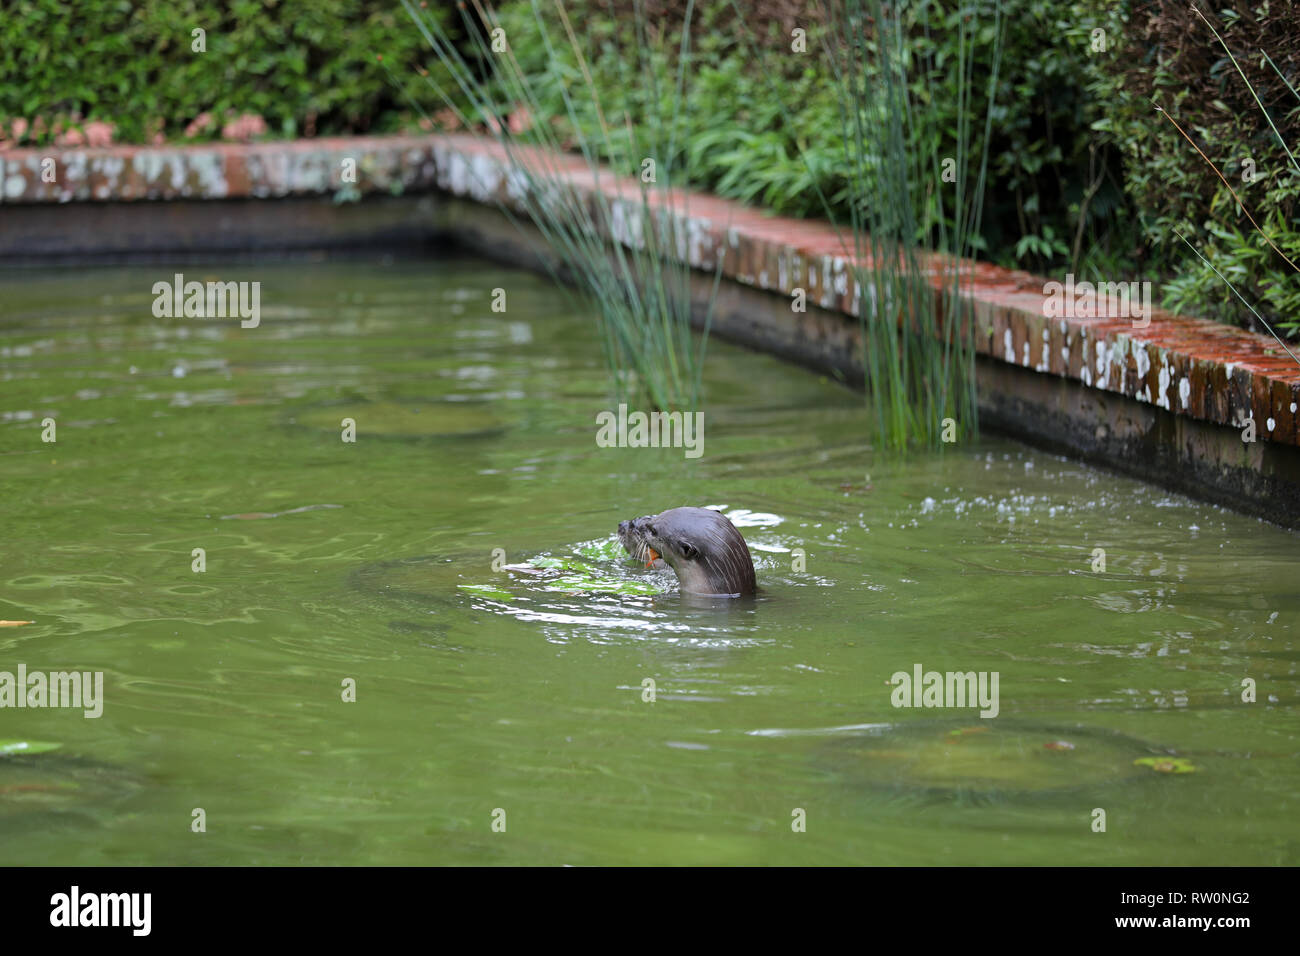 Otter in Singapore Stock Photo